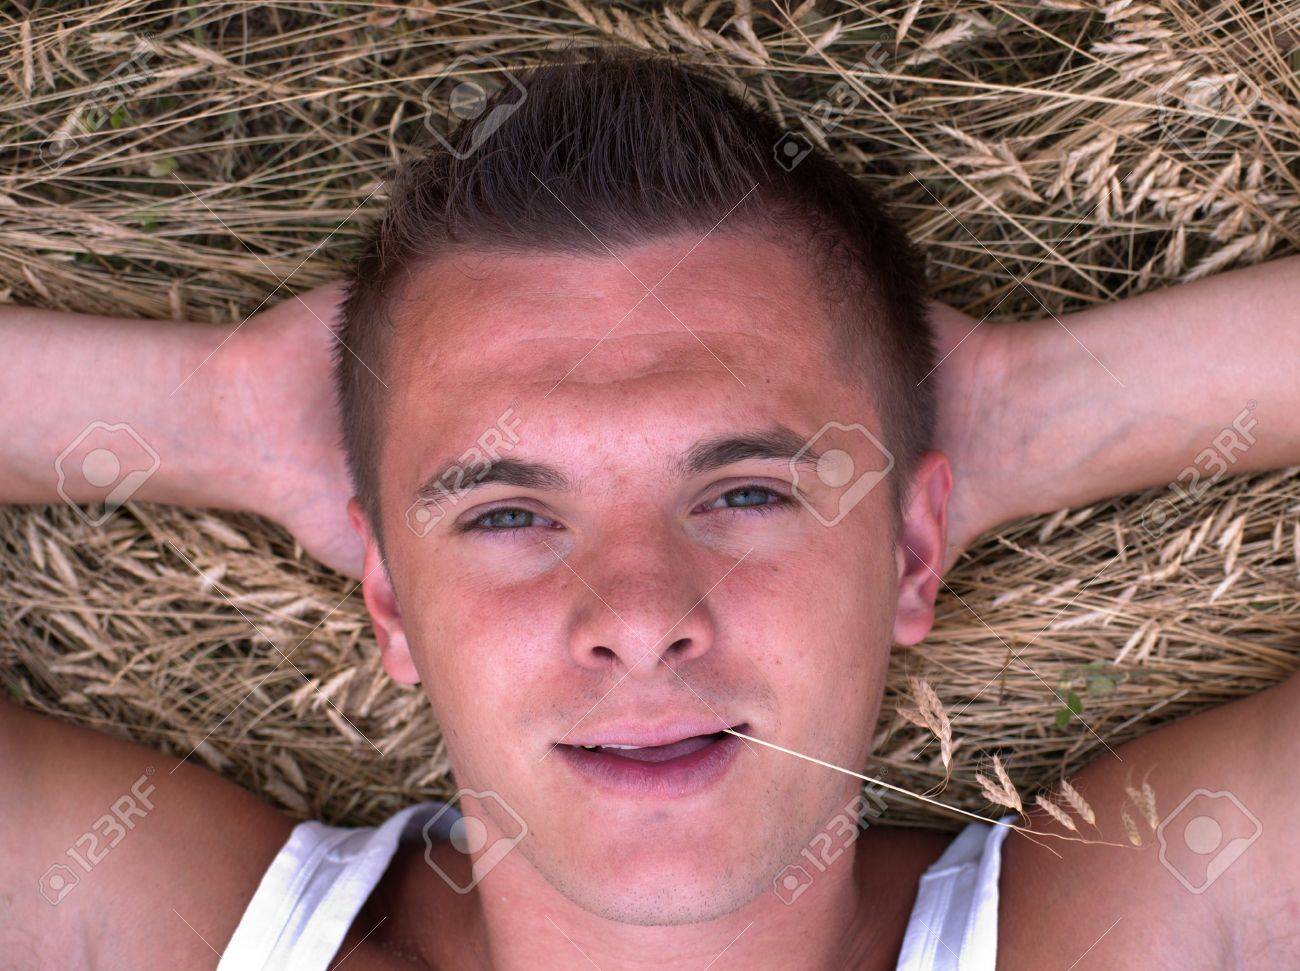 7379980-portrait-of-a-young-man-with-a-straw-in-his-mouth-on-a-hay-background.jpg